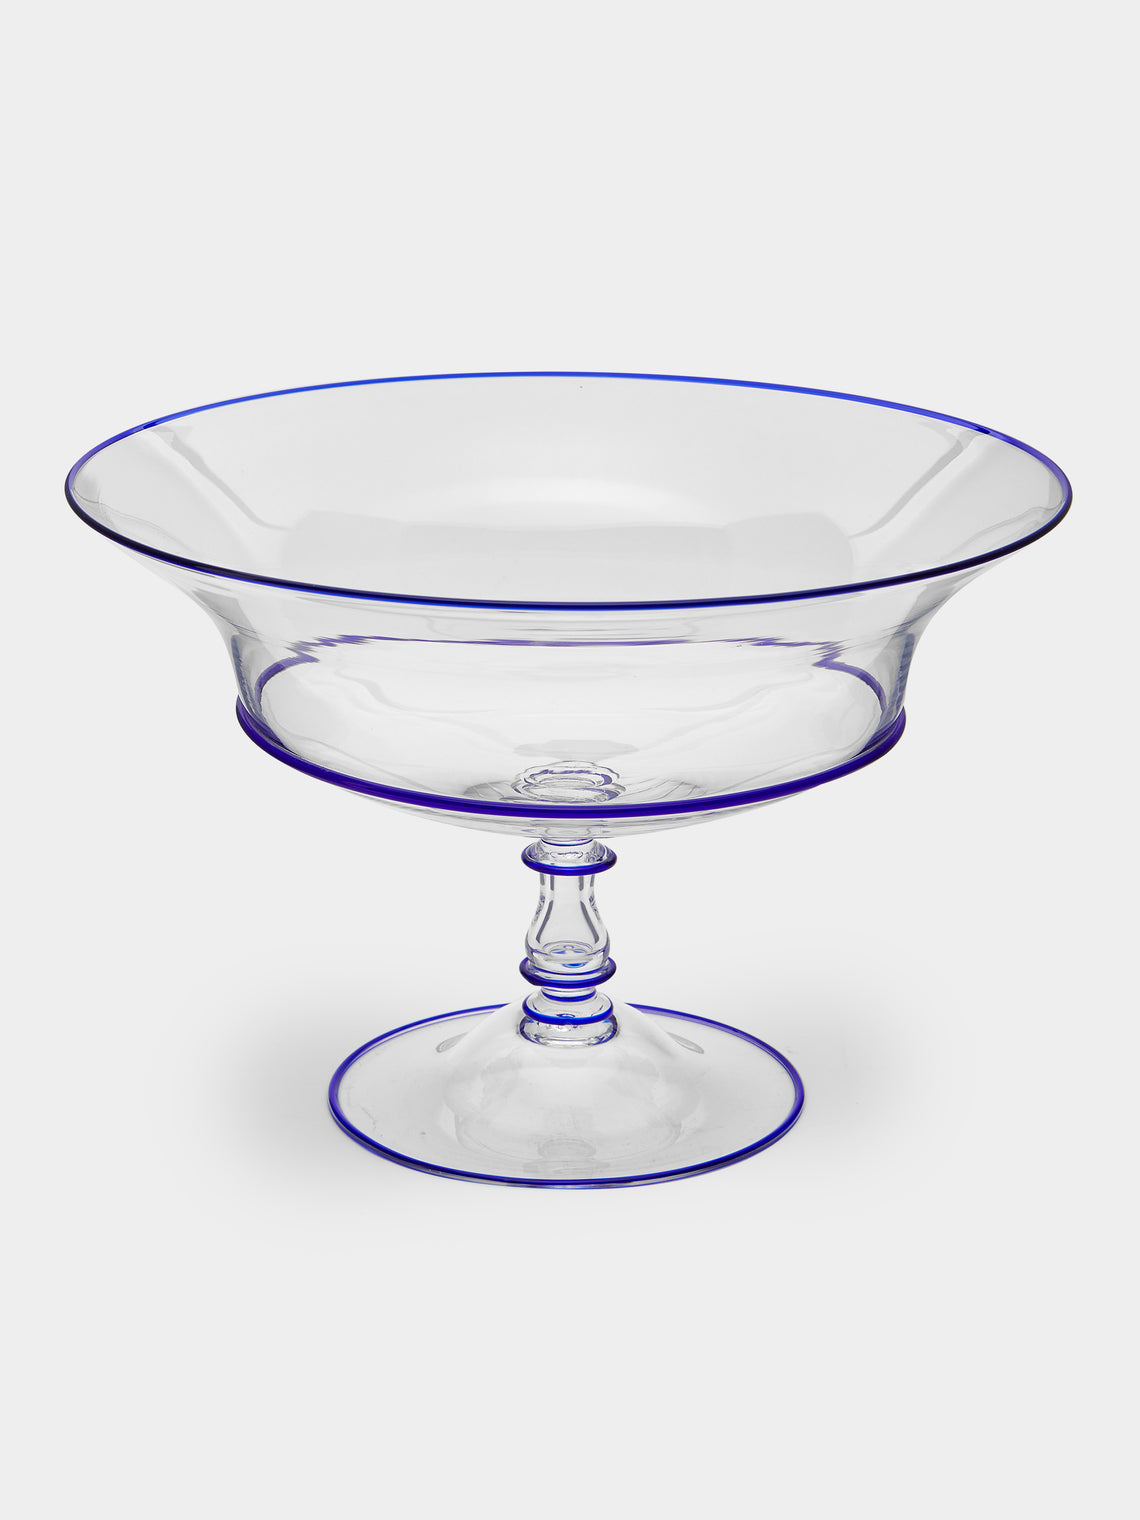 Antique and Vintage - 1920 Murano Glass Fruit Bowl -  - ABASK - 